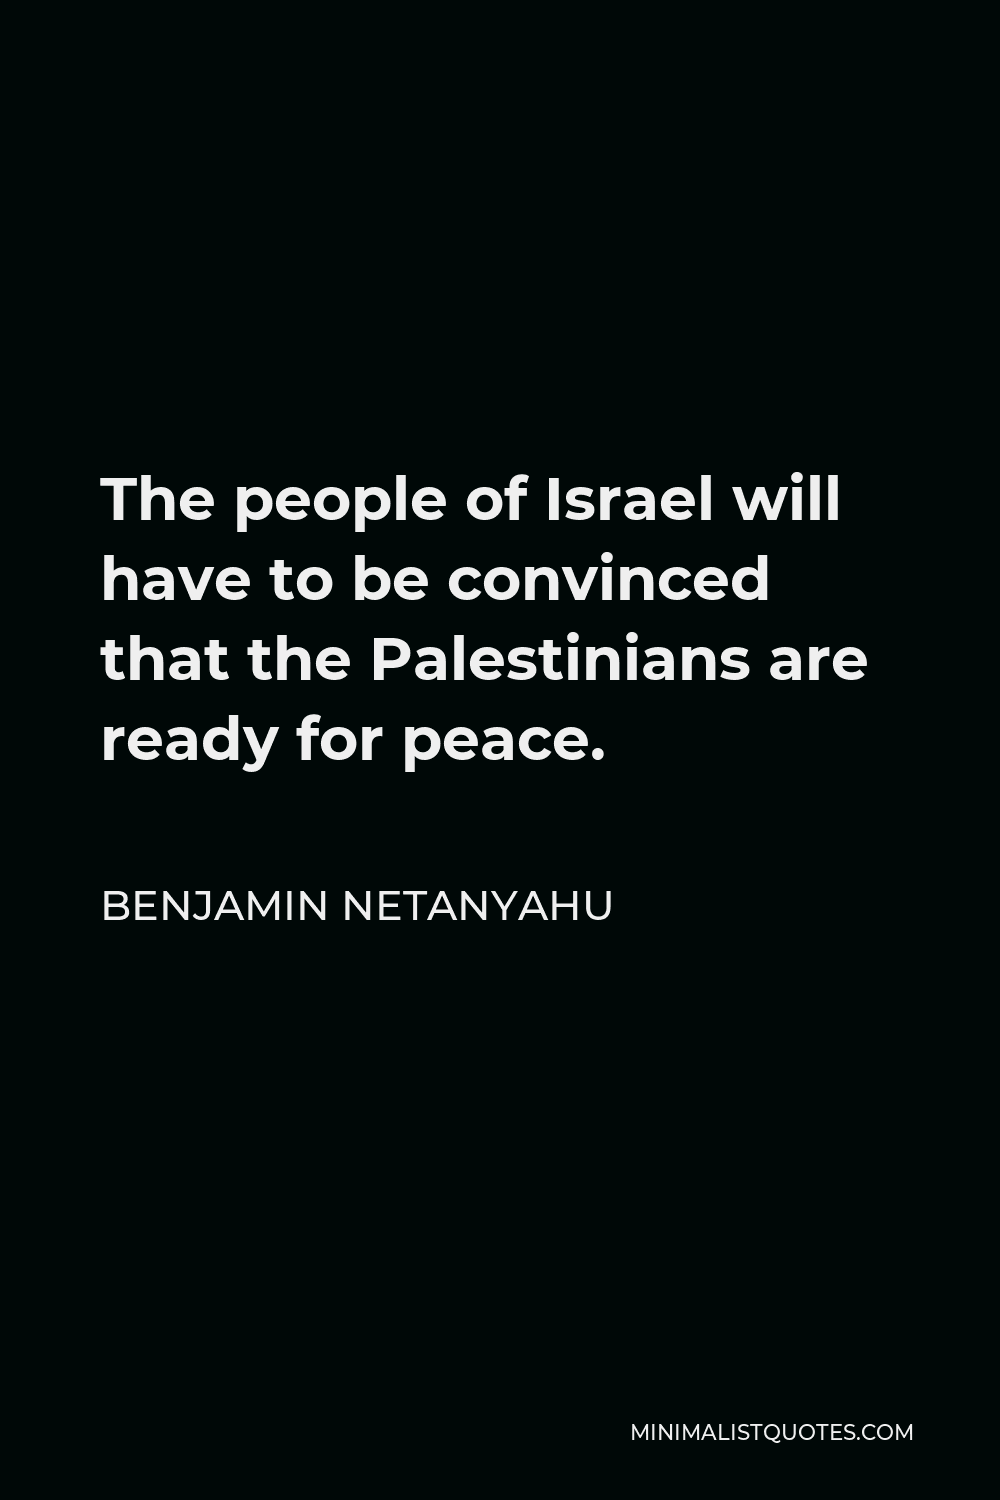 Benjamin Netanyahu Quote - The people of Israel will have to be convinced that the Palestinians are ready for peace.